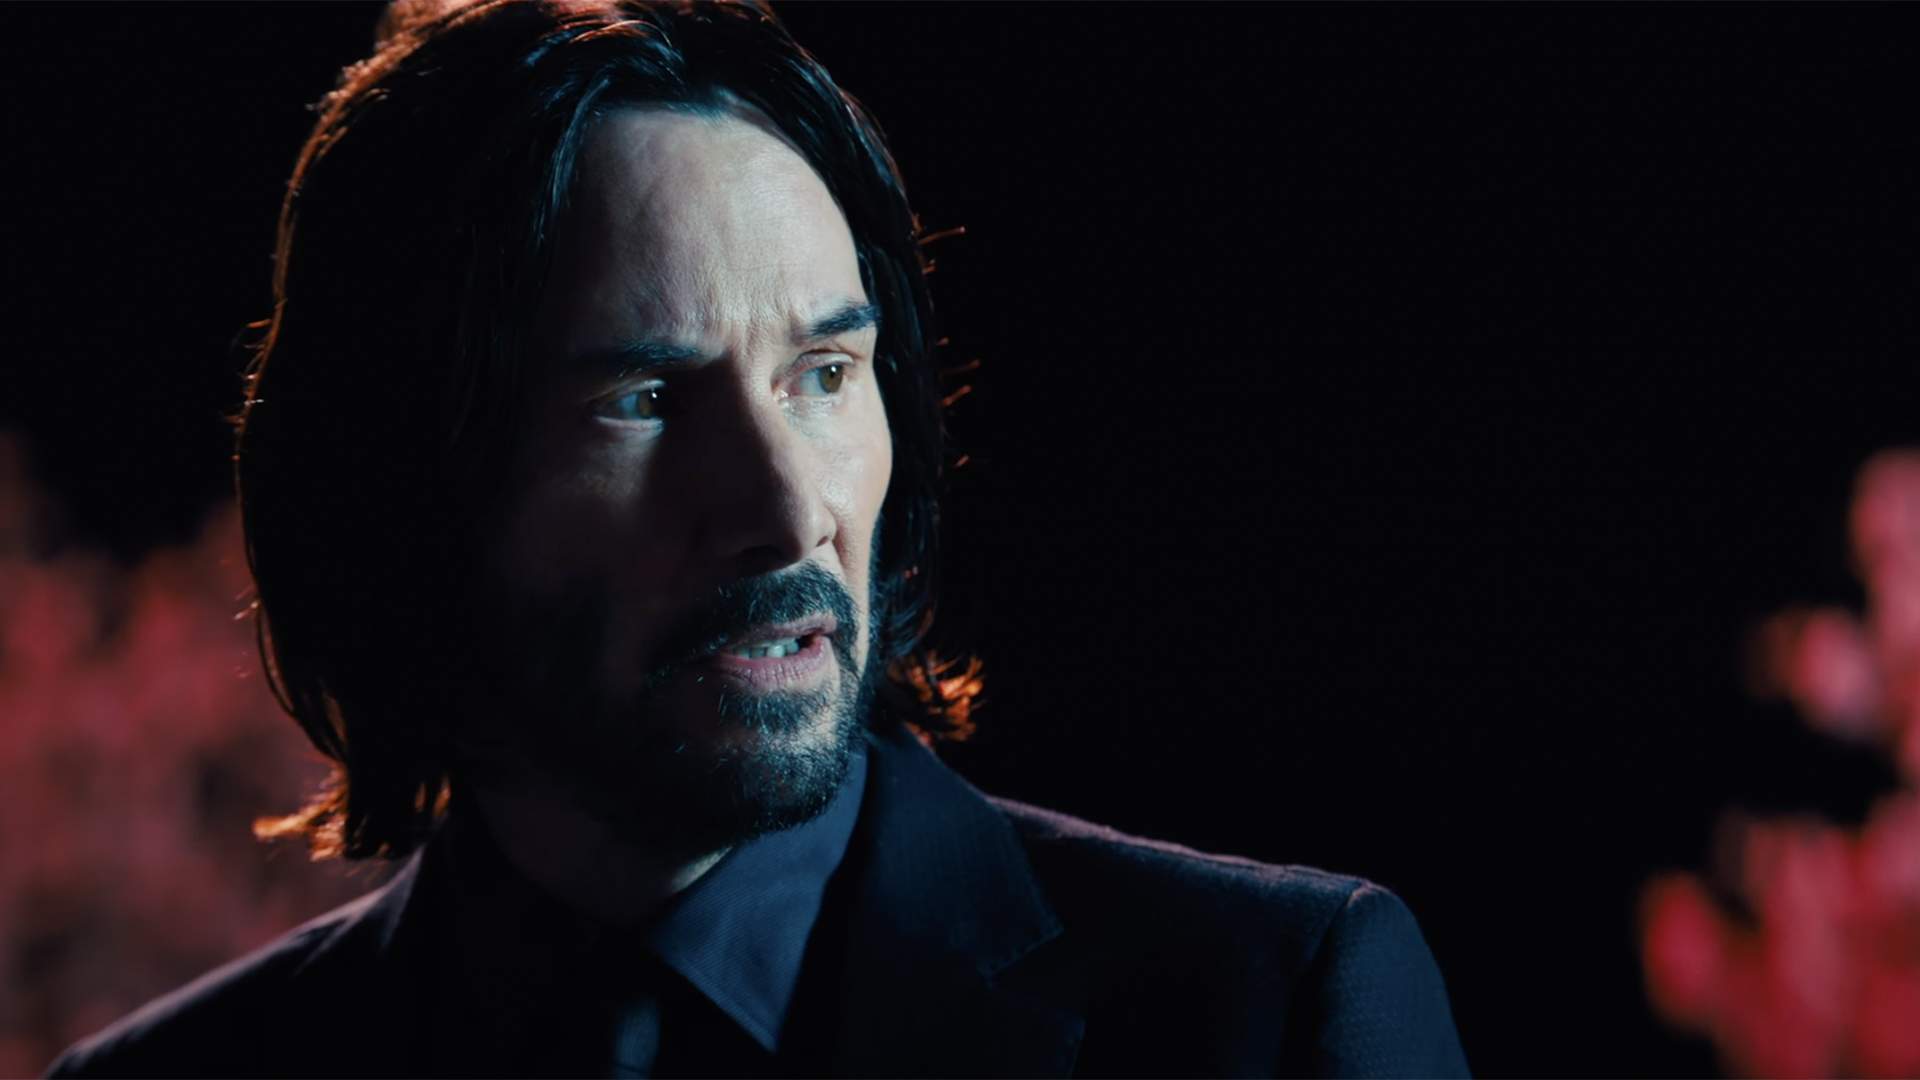 Keanu Reeves Faces a Last Duel for Freedom in the Frenetic Full Trailer for 'John Wick: Chapter 4' 